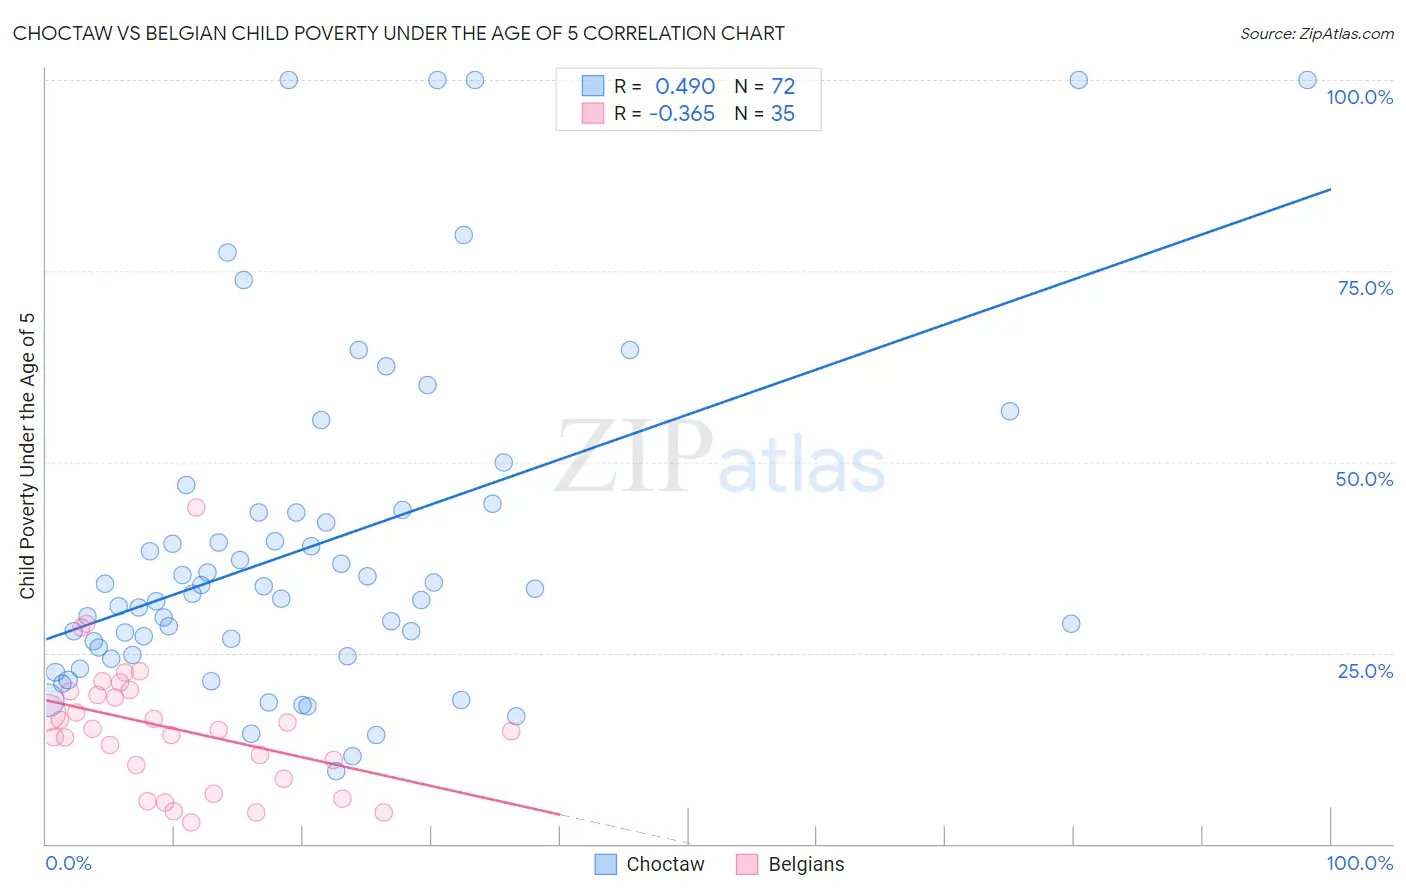 Choctaw vs Belgian Child Poverty Under the Age of 5